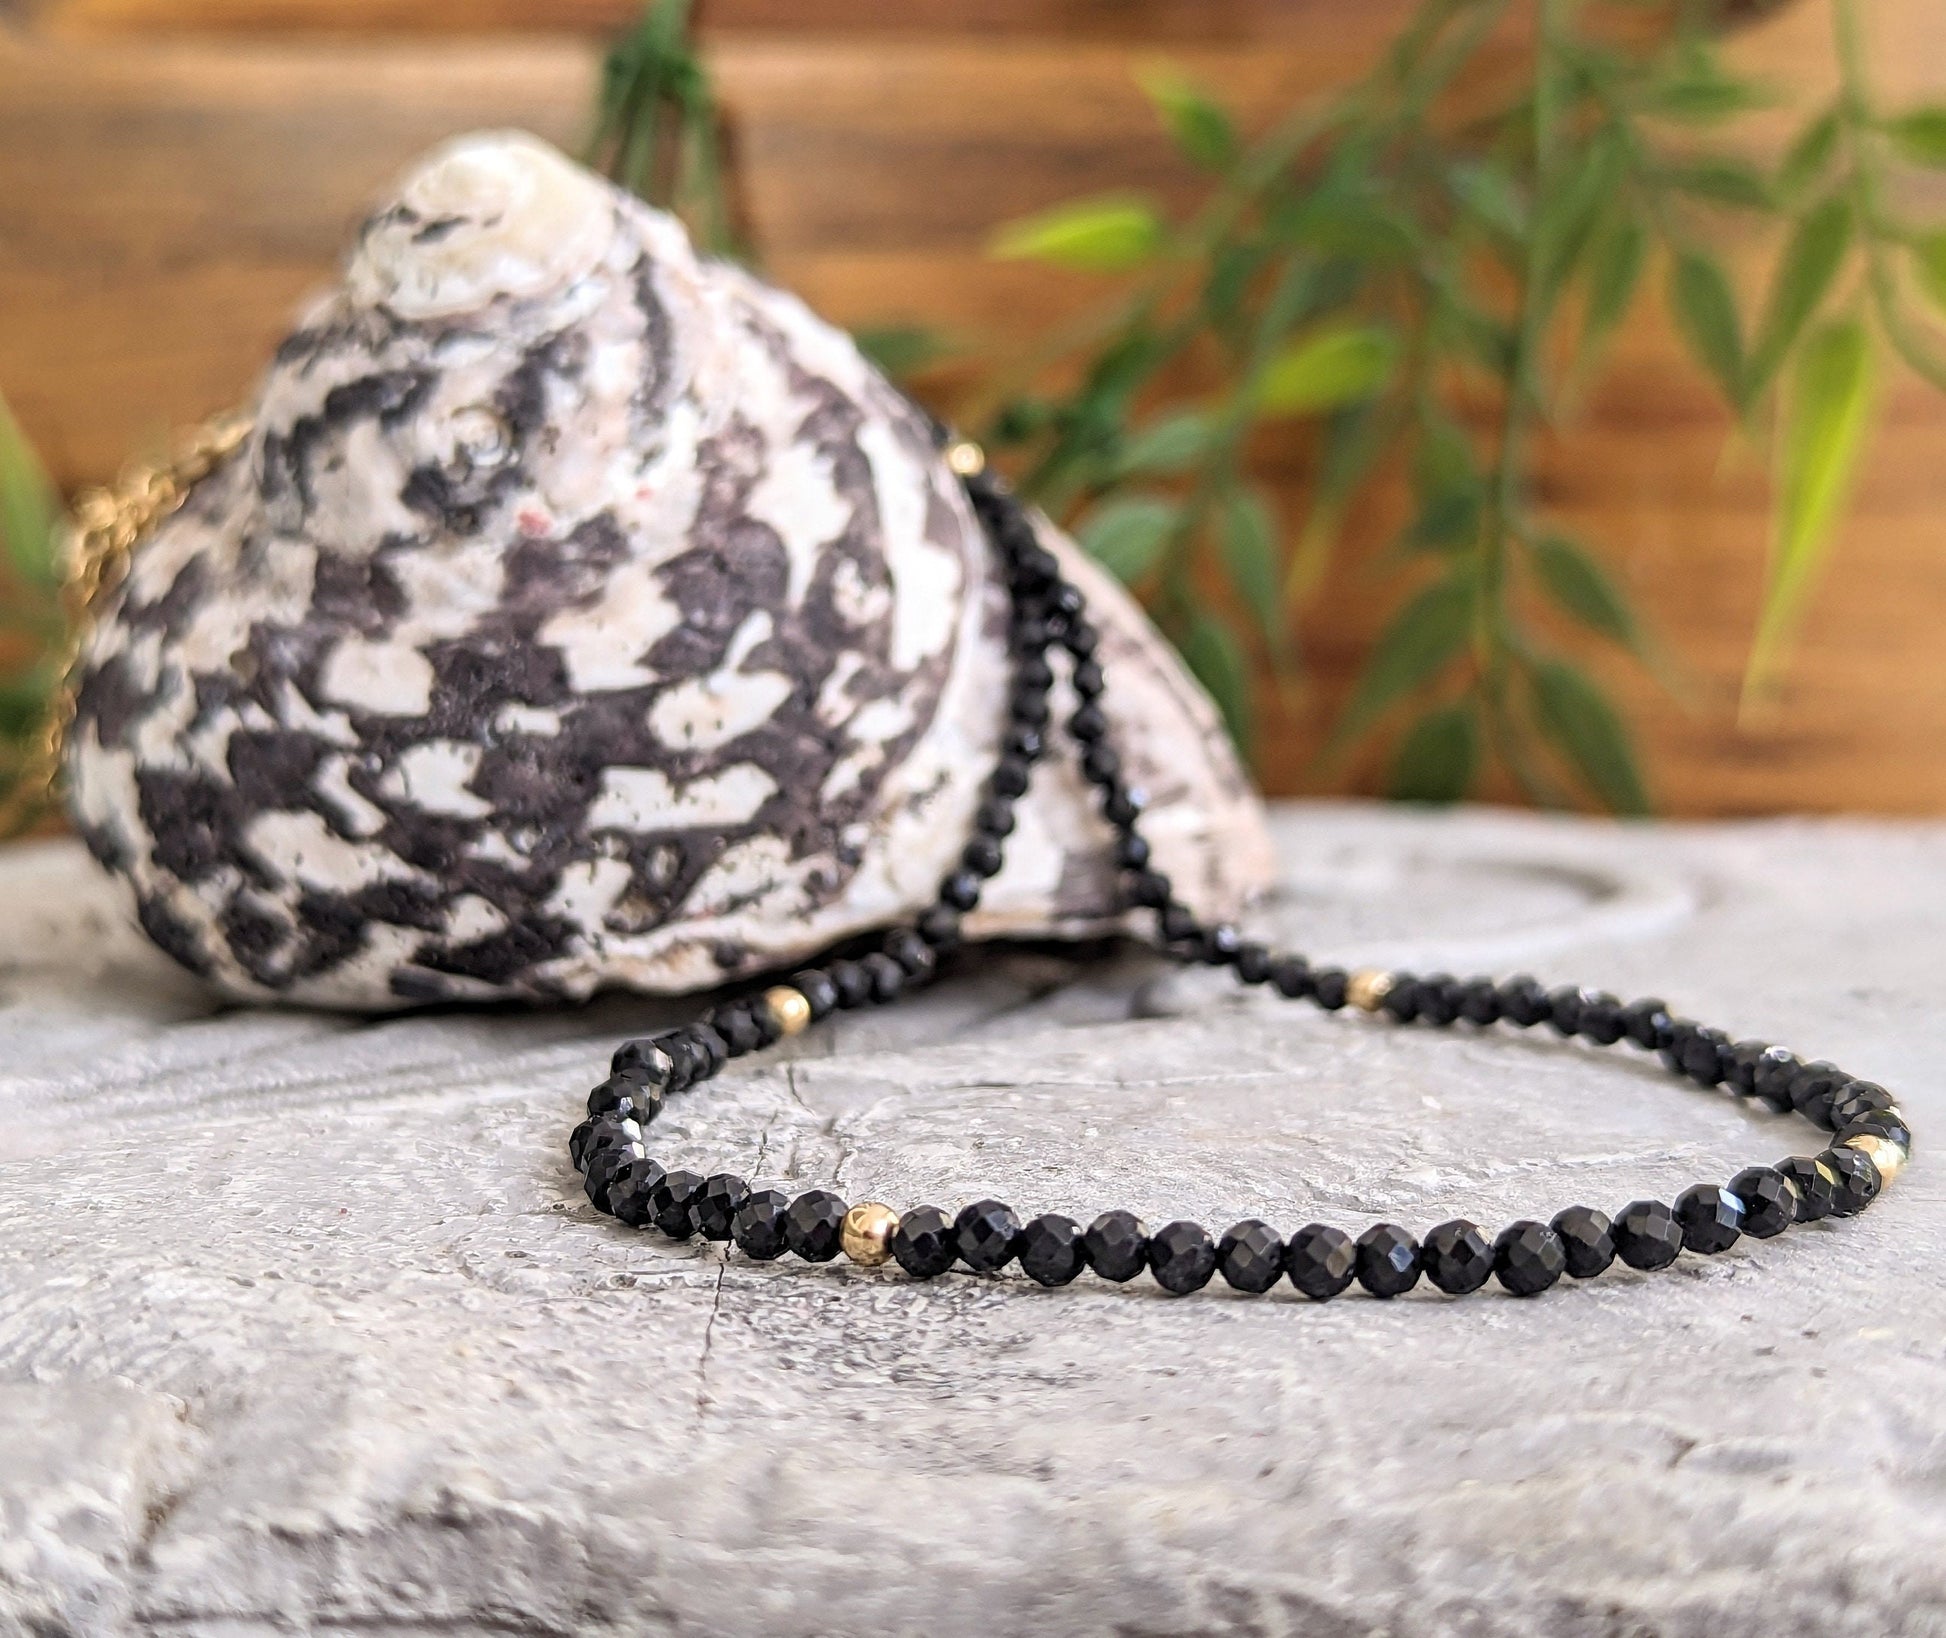 Black Spinel Bead necklace with 14k Gold components